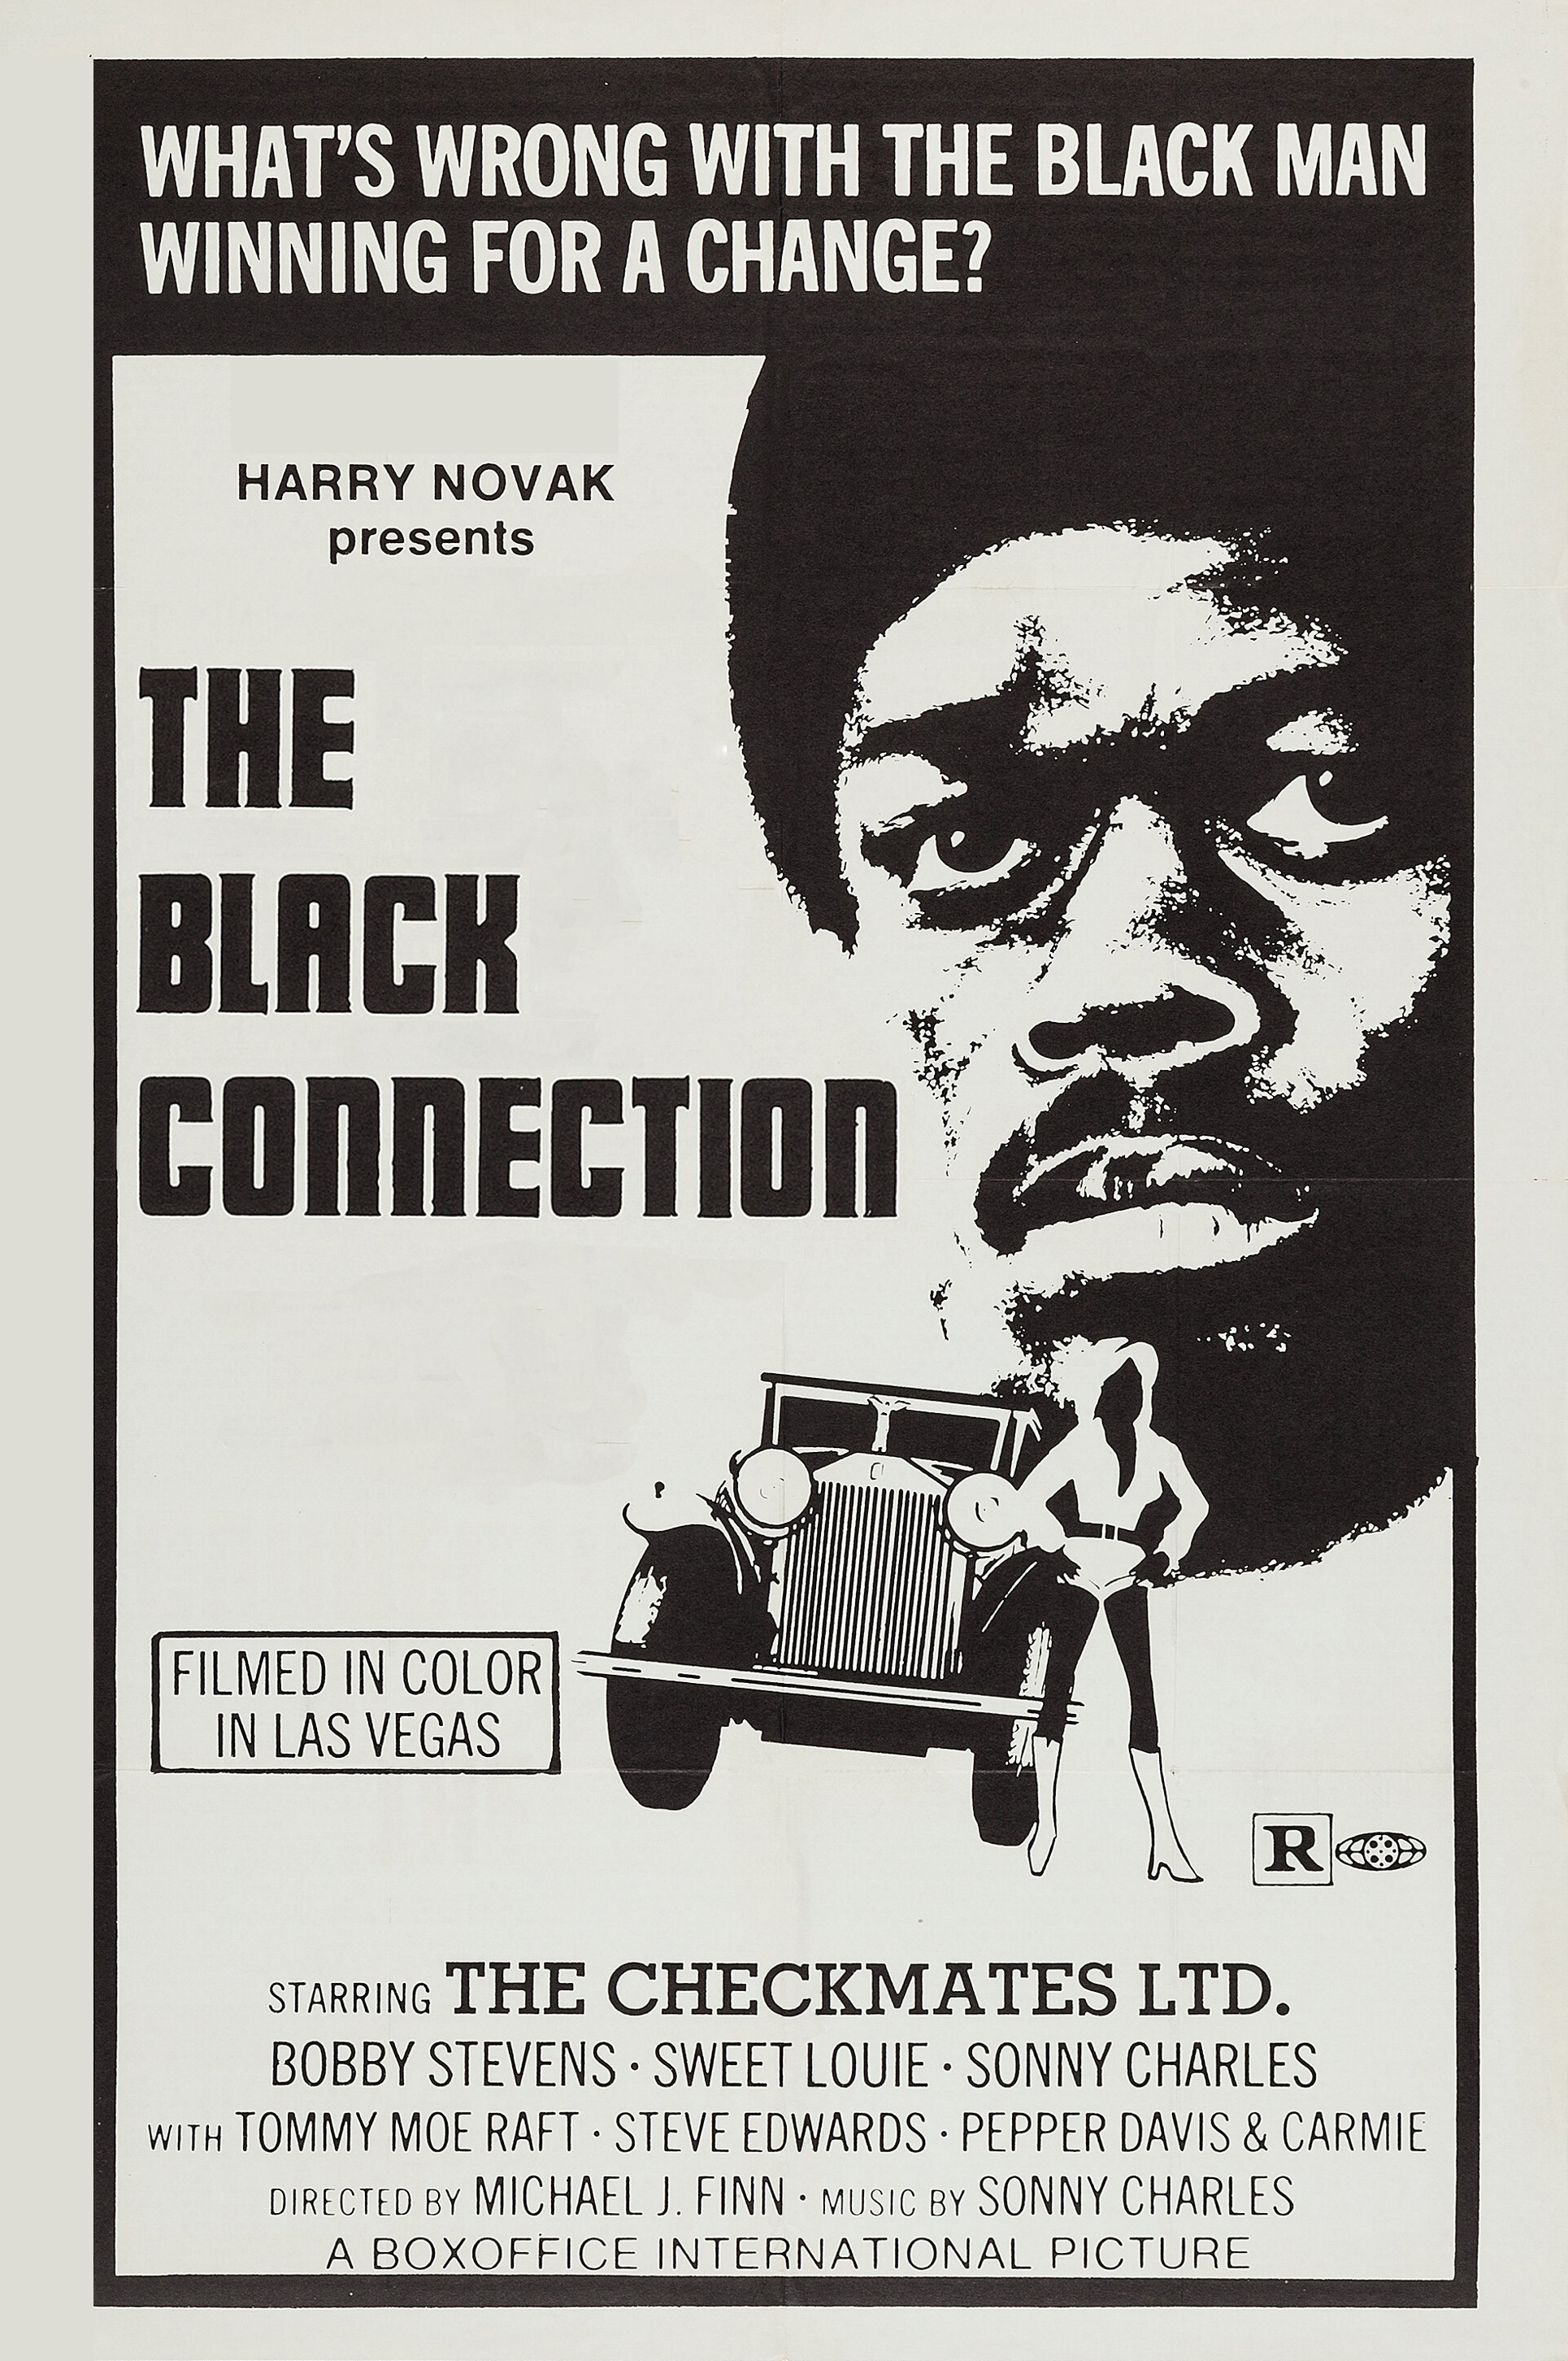 The Black Connection (1974) Screenshot 2 